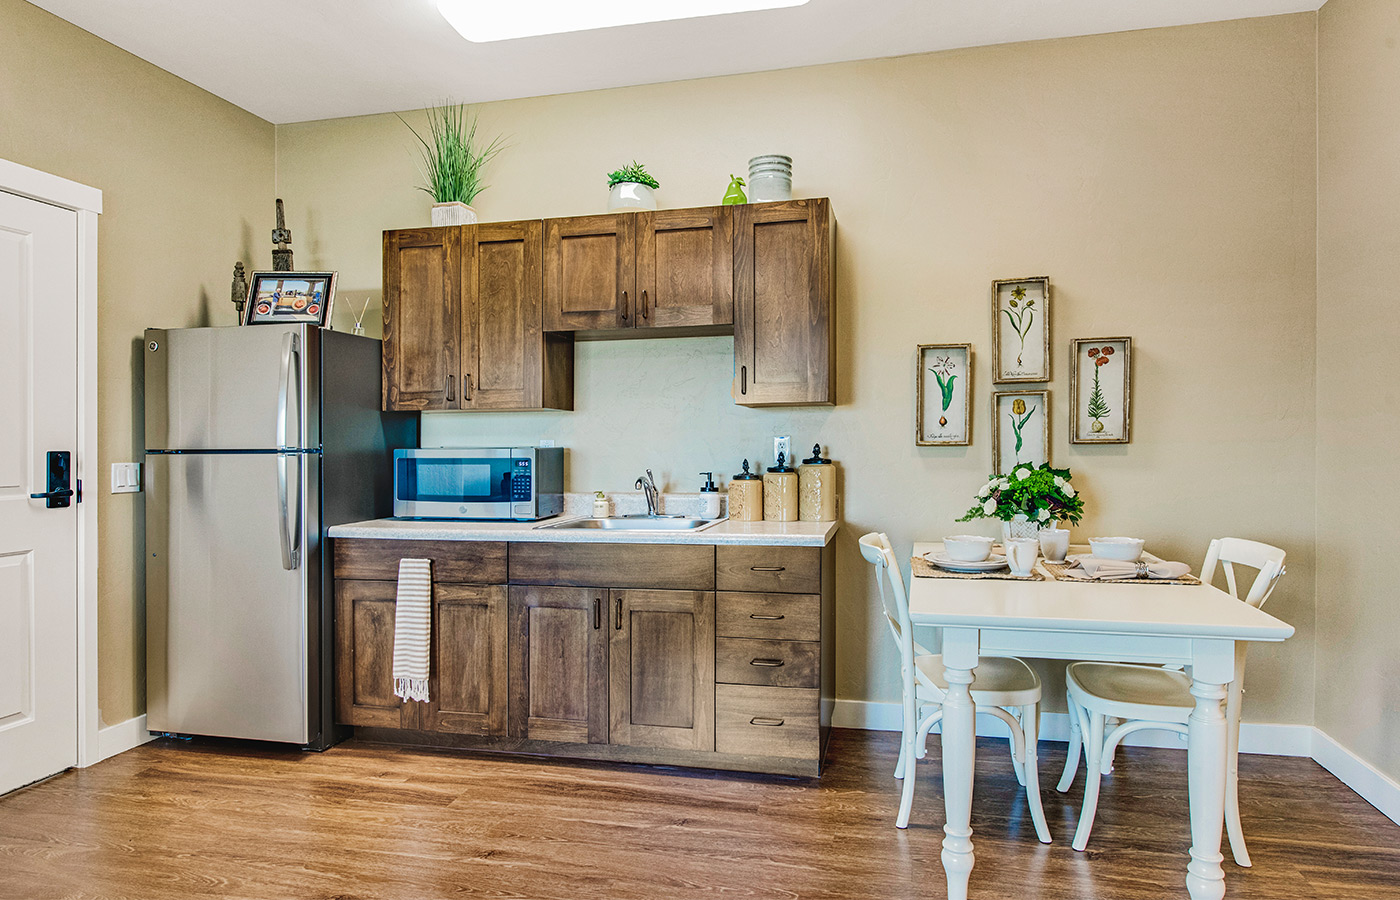 A kitchenette in an apartment at The Watermark at Continental Ranch.